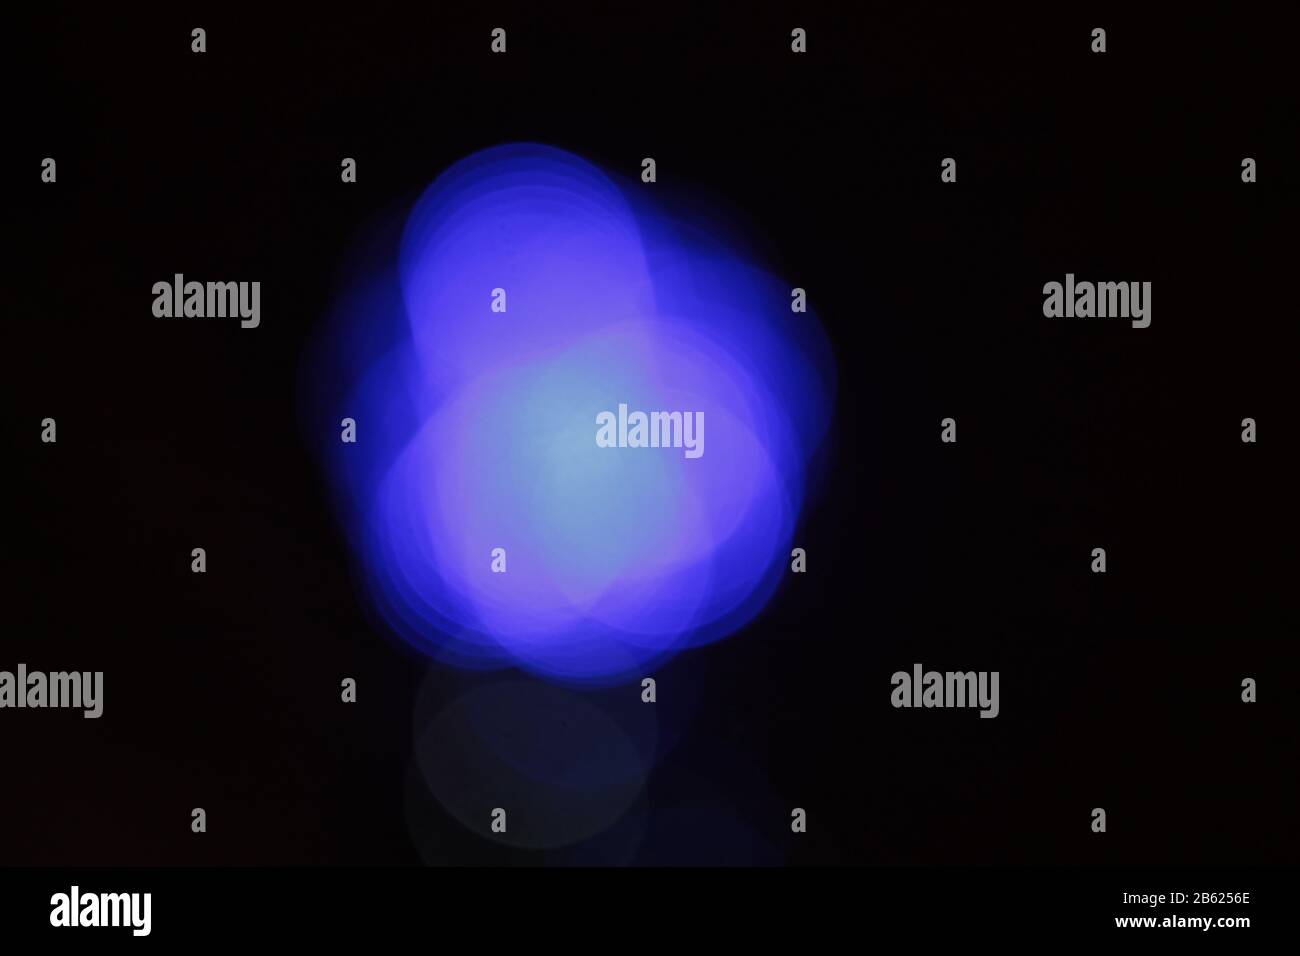 Colored blurry spots of blue, violet, lilac and purple on a black background. Element for design, place for text. Stock Photo